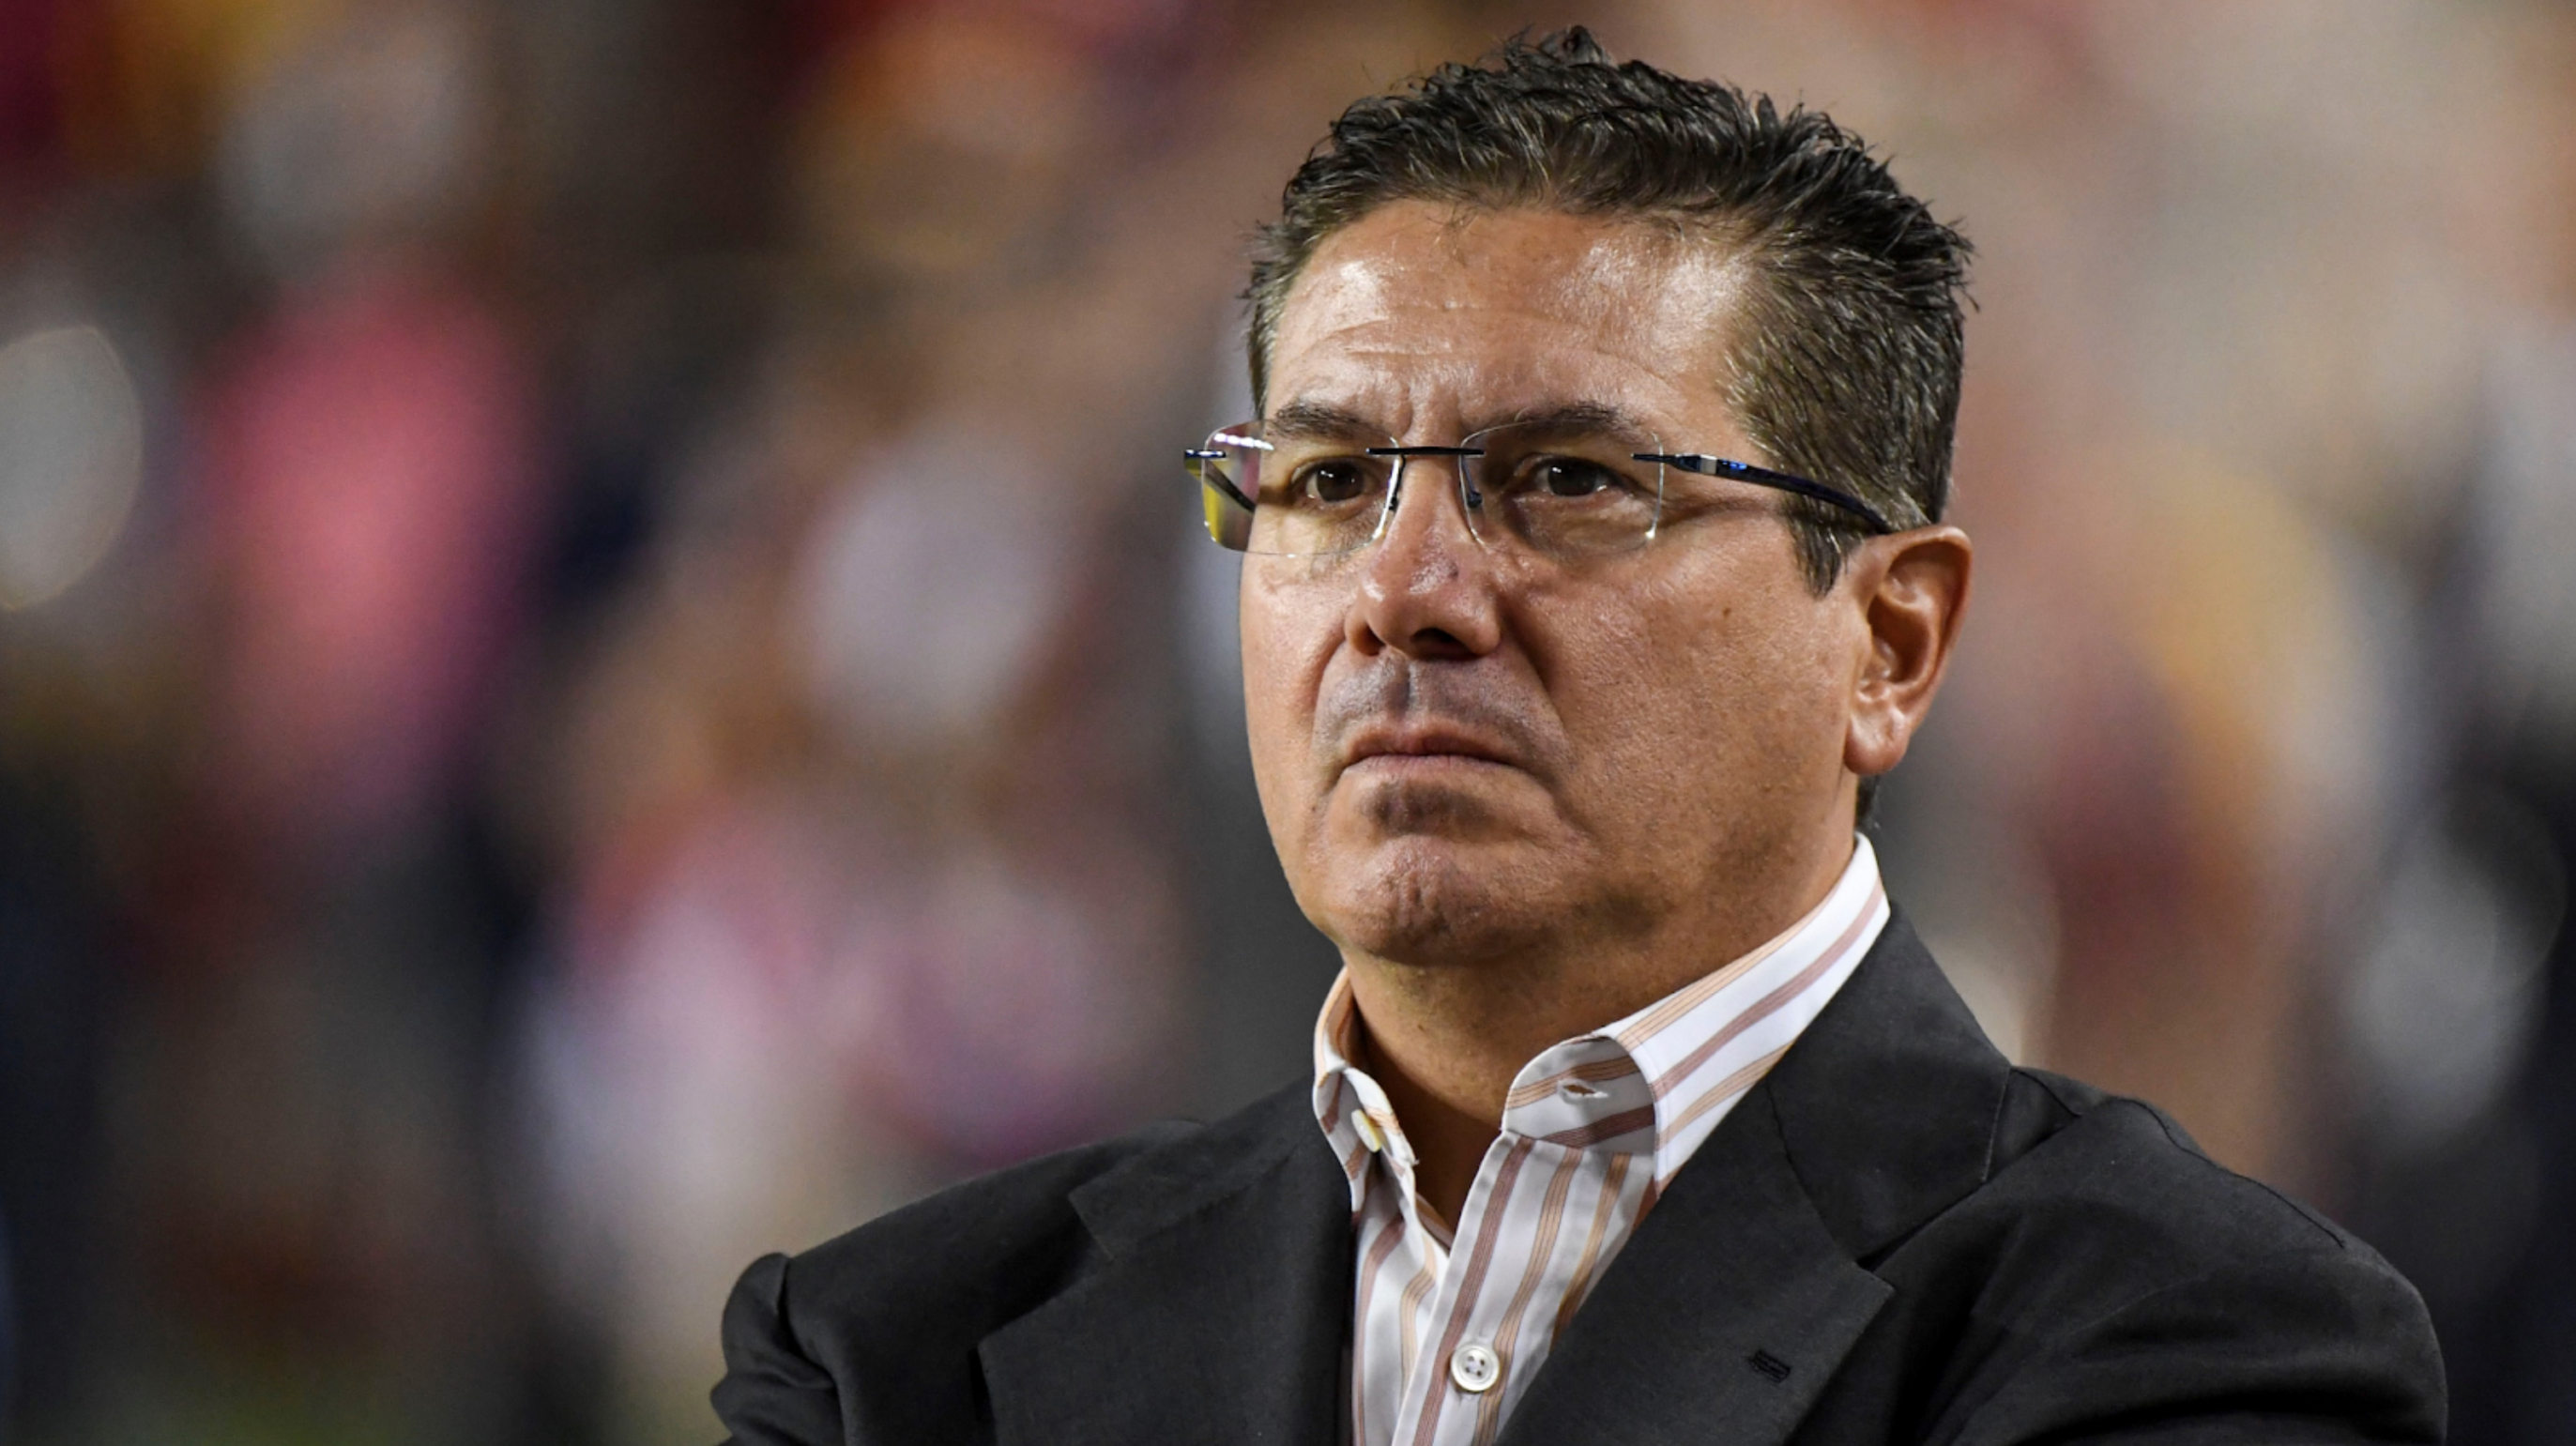 Dan Snyder: A Horrible NFL Owner and Possibly a Worse Human Being 